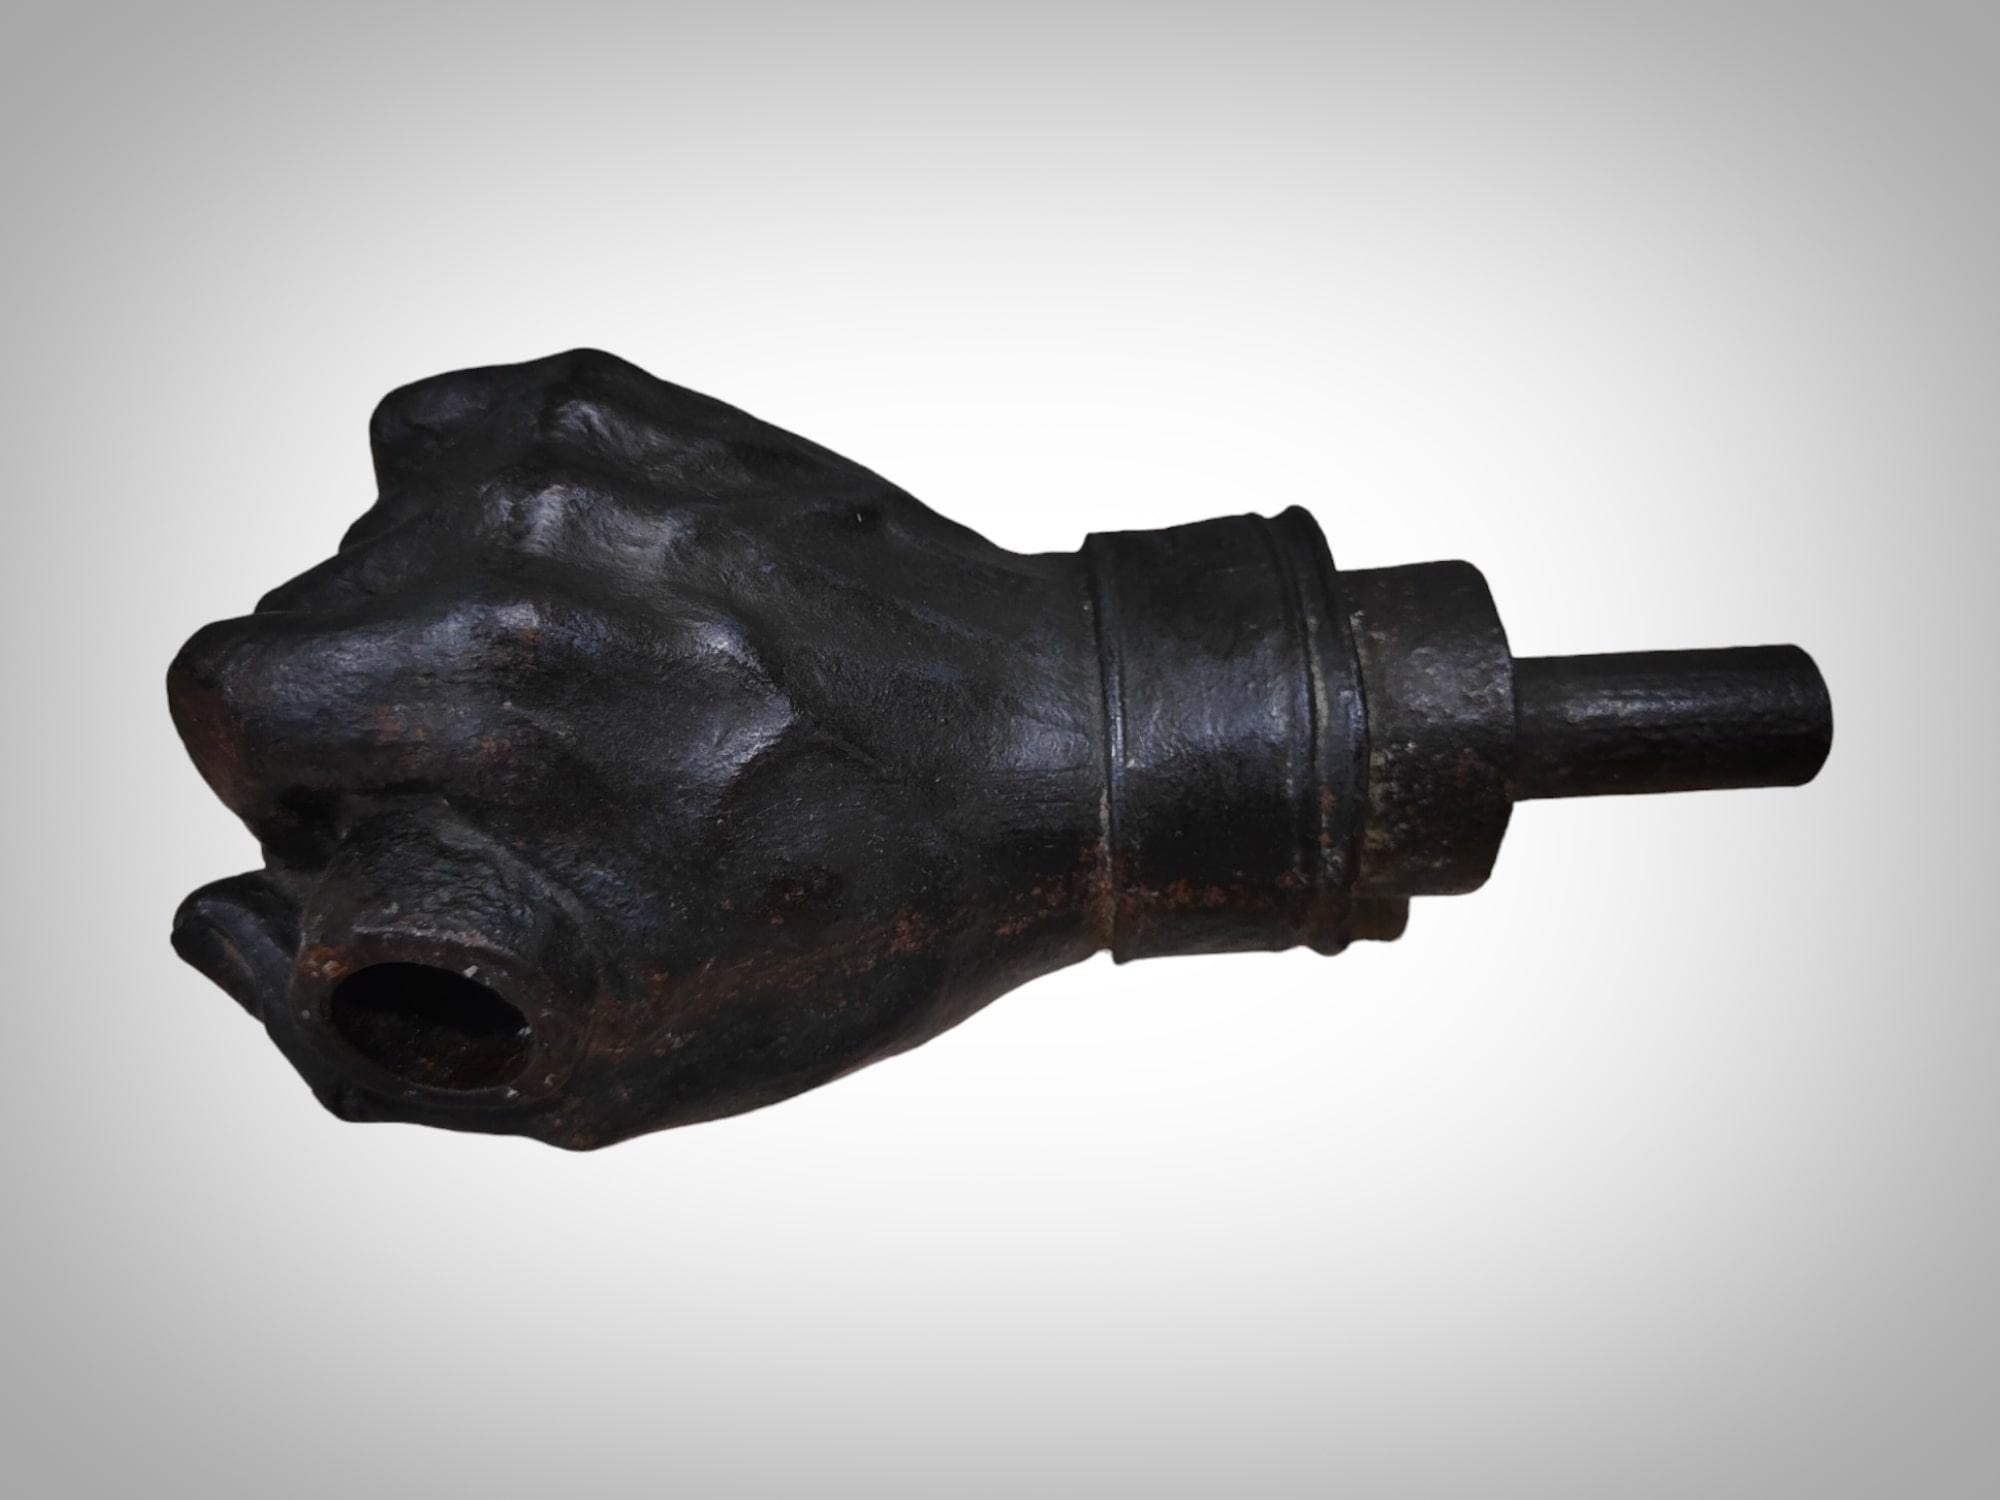 We present an elegant forged iron sculpture depicting a hand, meticulously crafted by a master blacksmith at the forge. This work, executed with various techniques of hot ironwork, reflects the artisanal skill and technical mastery of its creator.